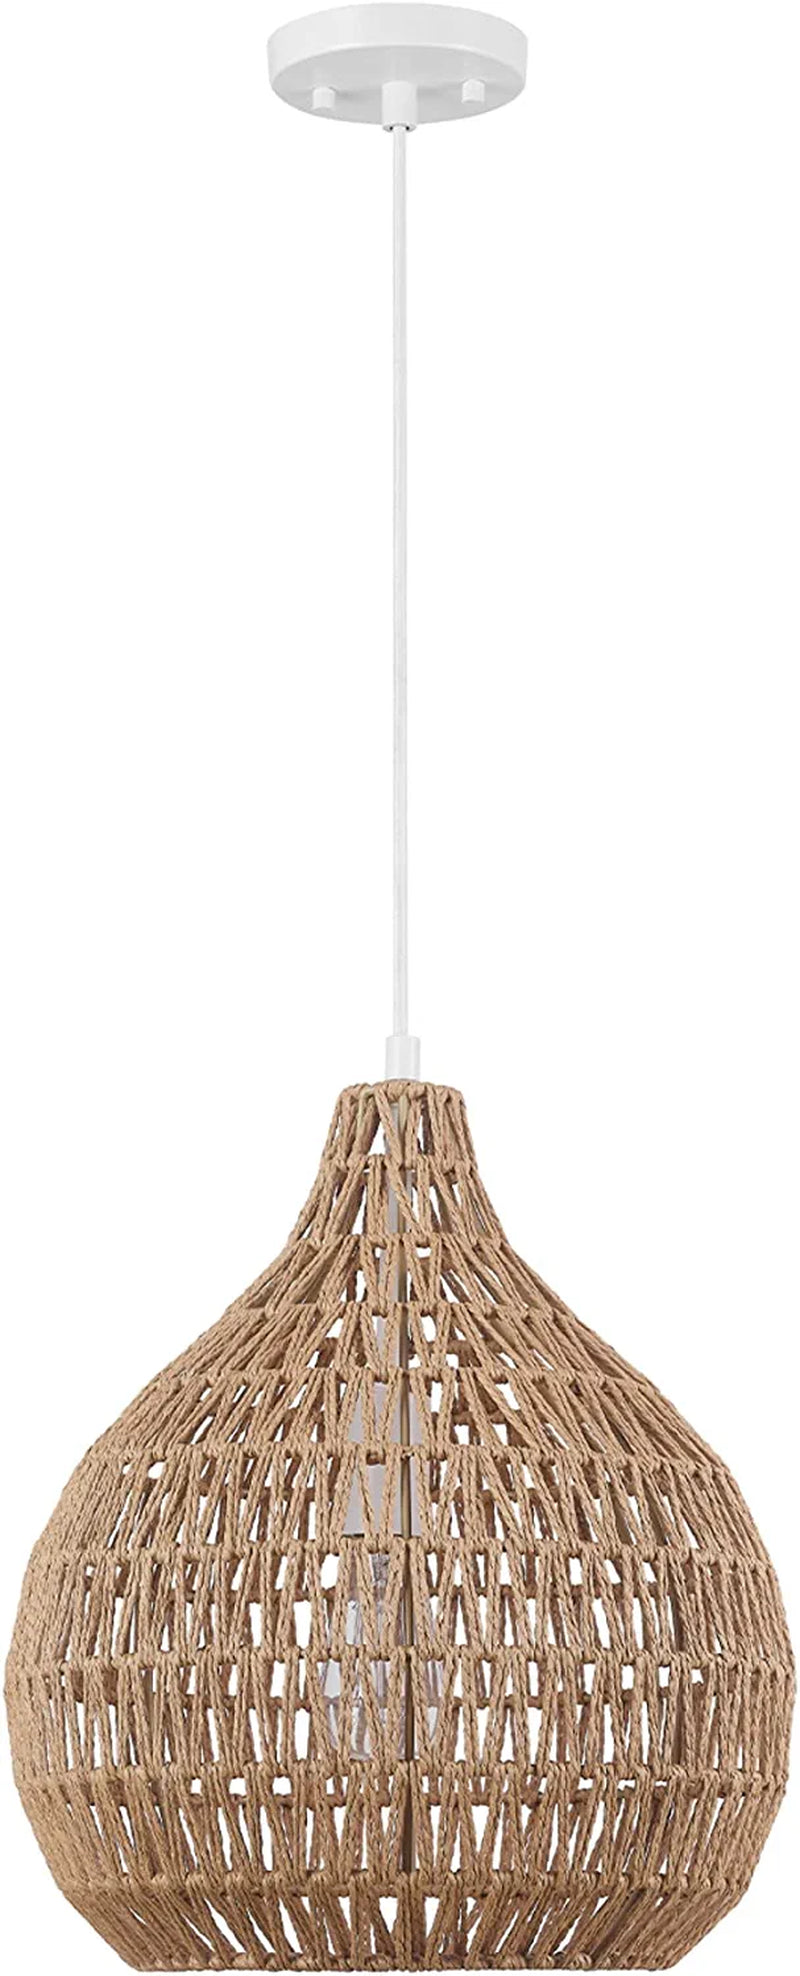 Globe Electric 61090 1-Light Pendant Light, Light Twine Shade, White Socket, White Cloth Hanging Cord, E26 Base Socket, Kitchen Island, Pendant Light Fixture, Adjustable Height, Home Décor Lighting Home & Garden > Lighting > Lighting Fixtures Globe Electric Tika Without Bulb 